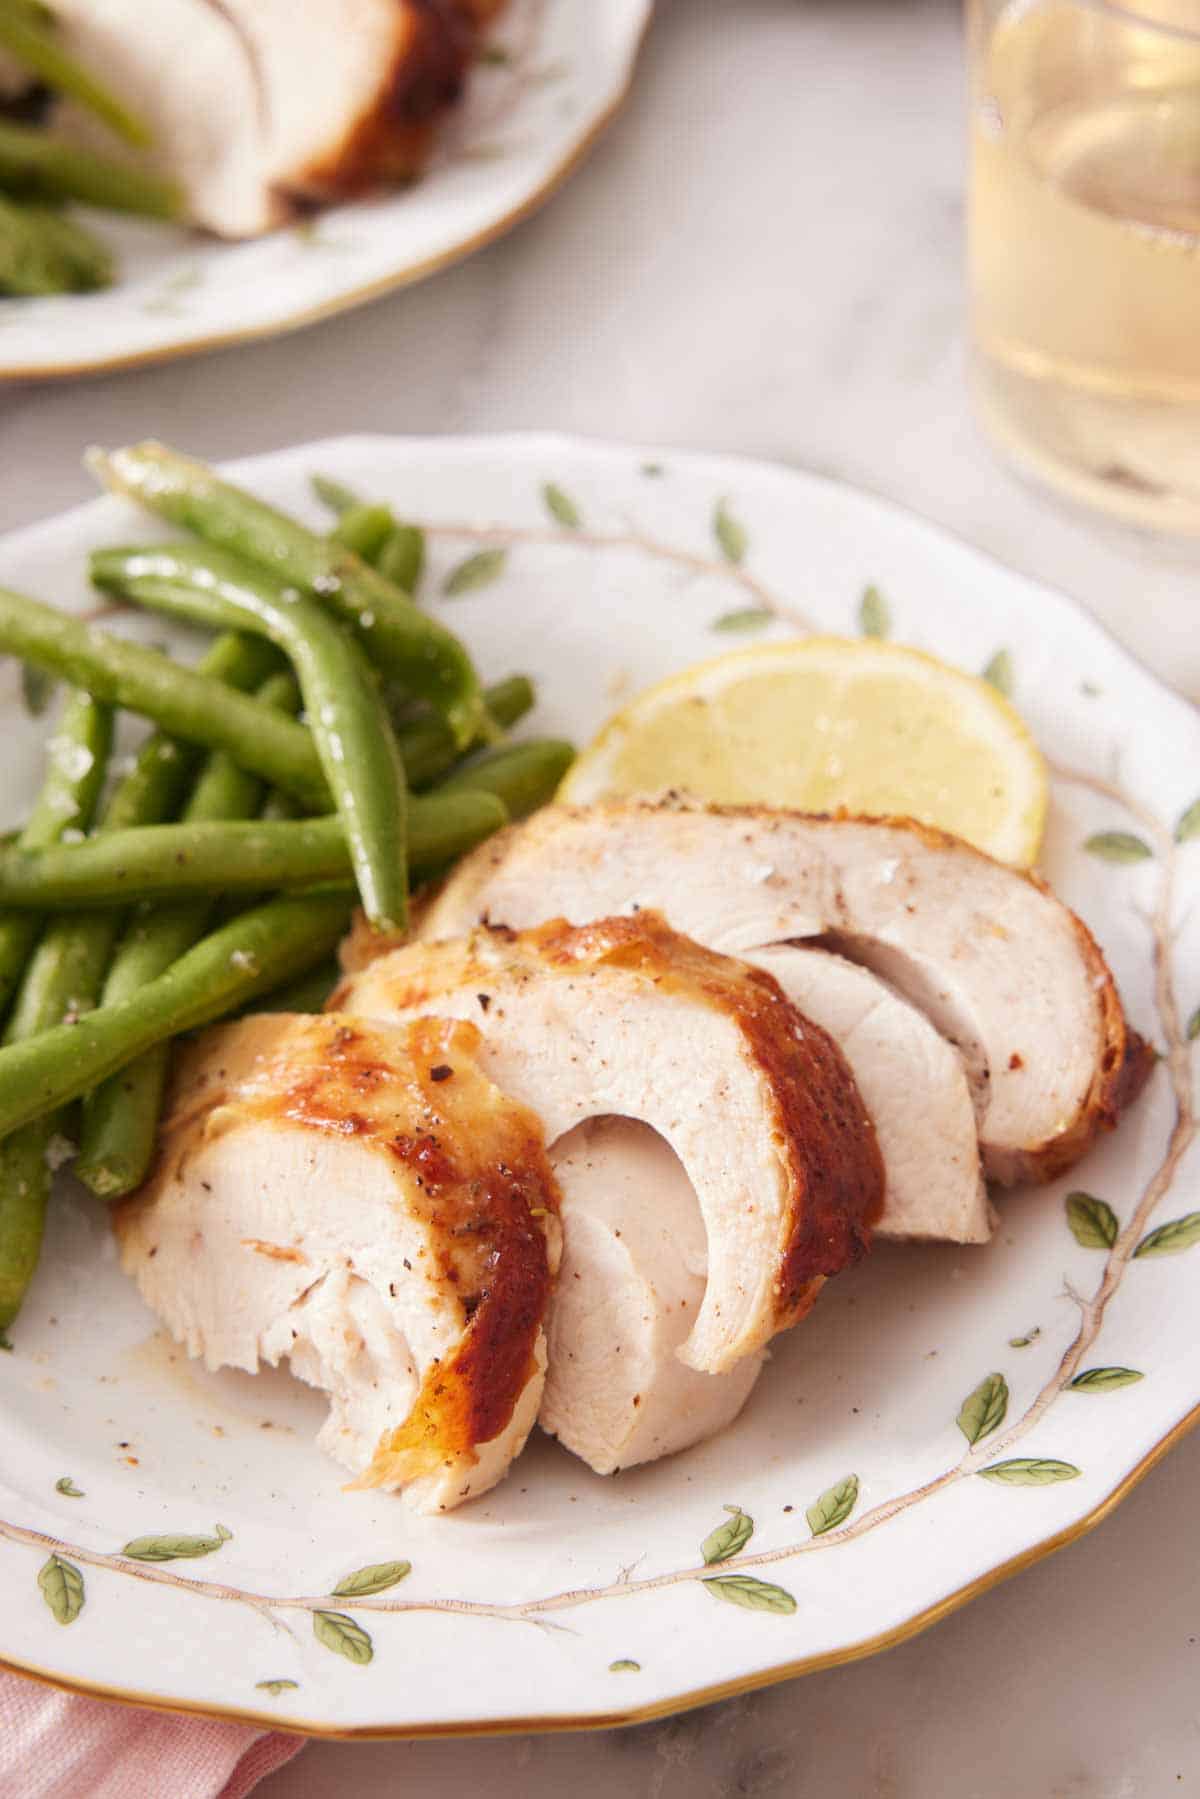 A plate with a serving of air fryer turkey breast with green beans and a lemon slice.